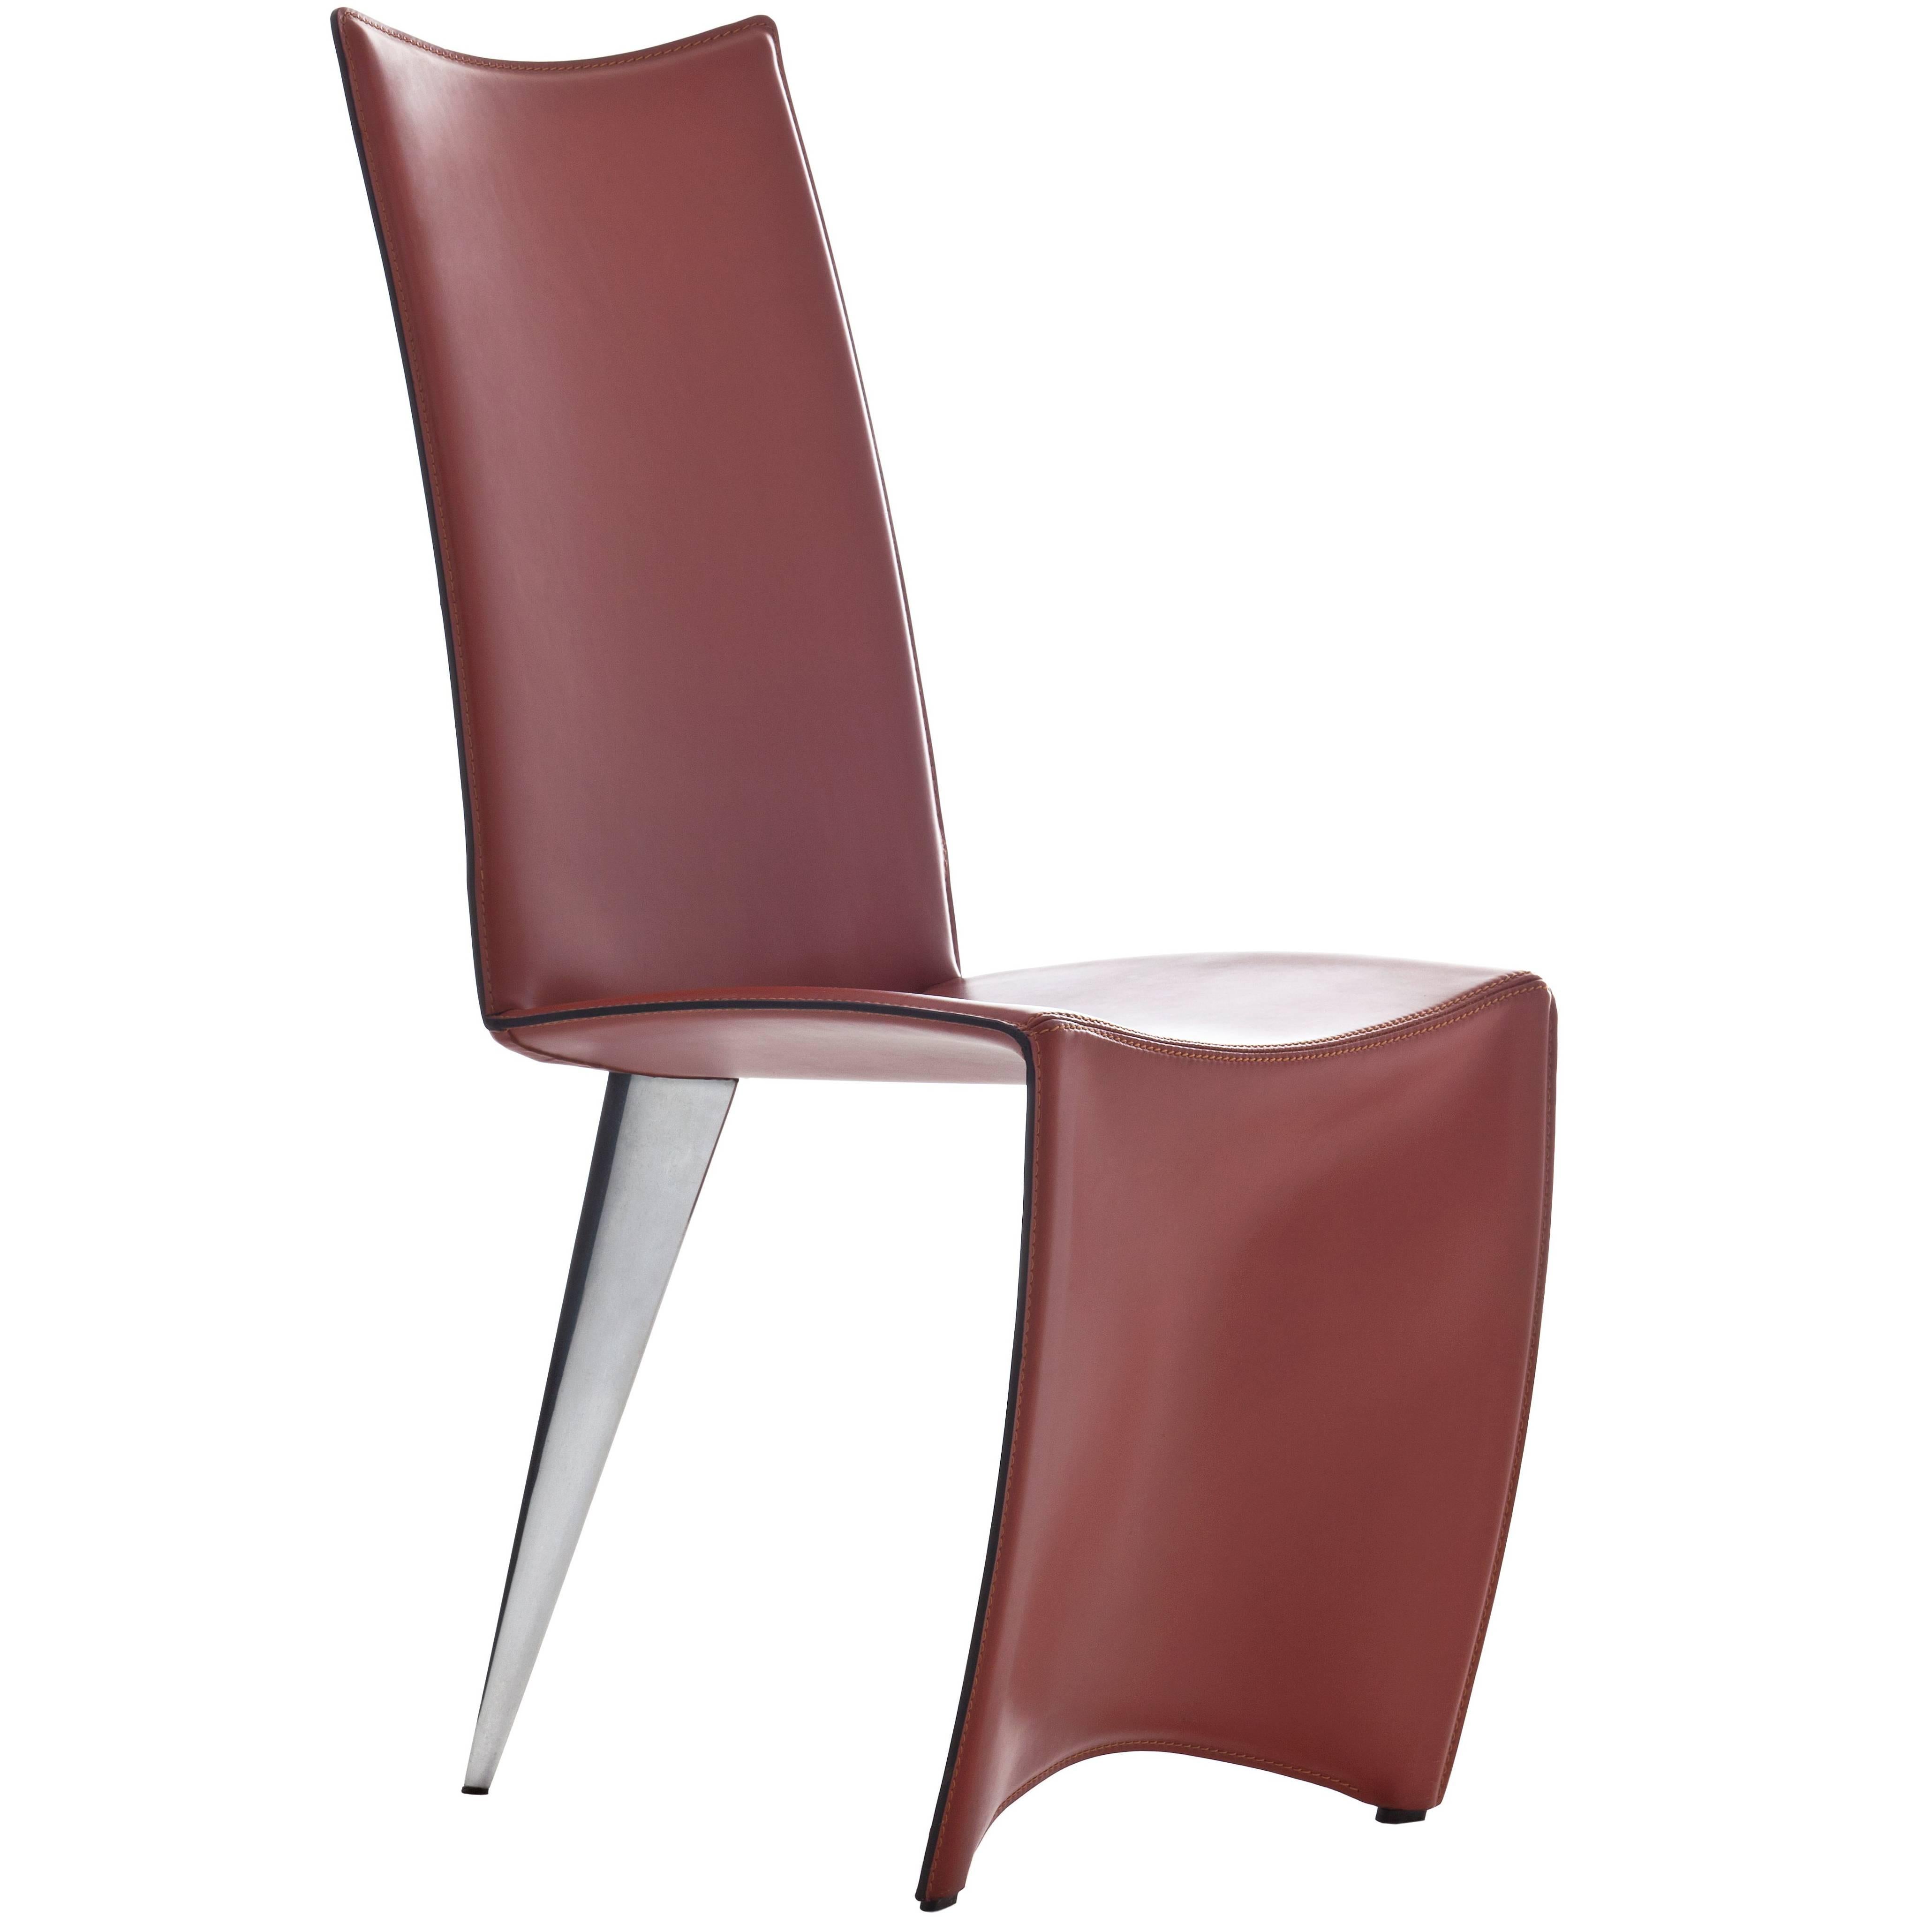 "Ed Archer" Leather and Polished Aluminum Chair by Philippe Starck for Driade